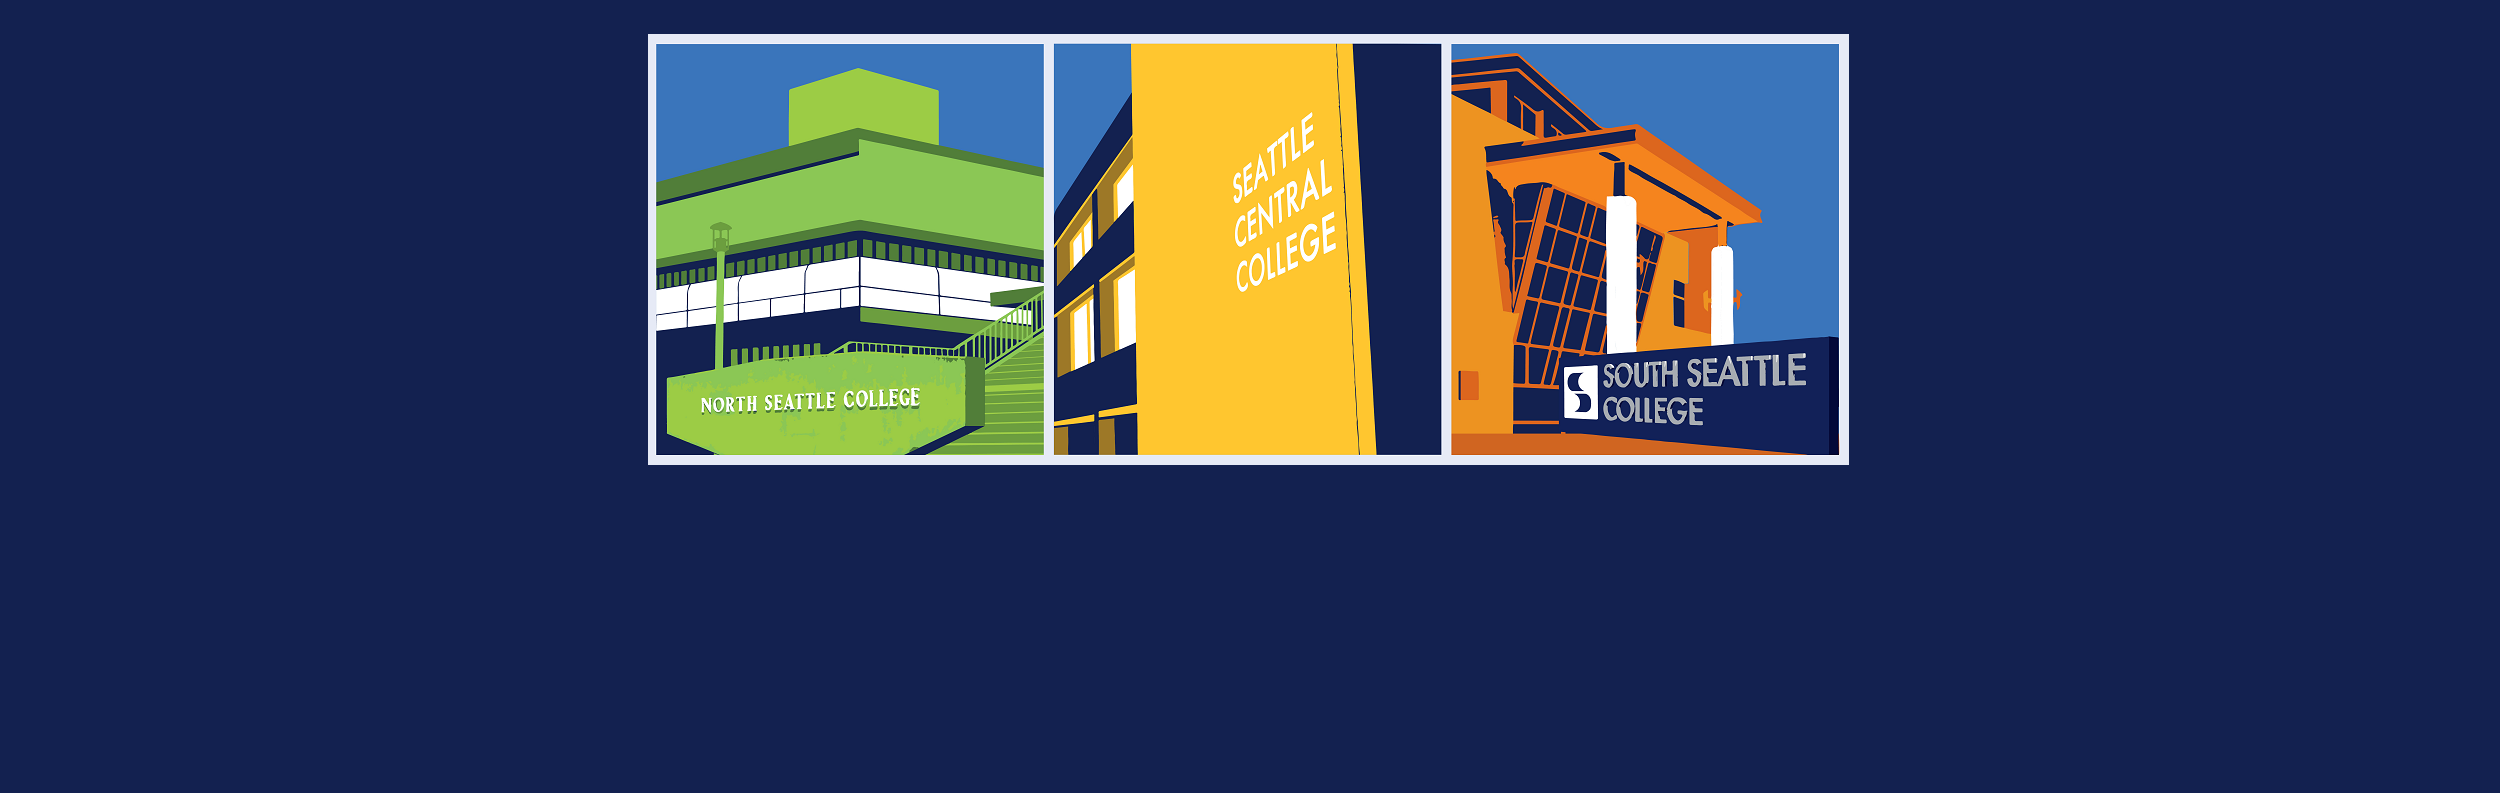 collage of stylized images of buildings and signage at North Seattle College, Seattle Central College, and South Seattle College